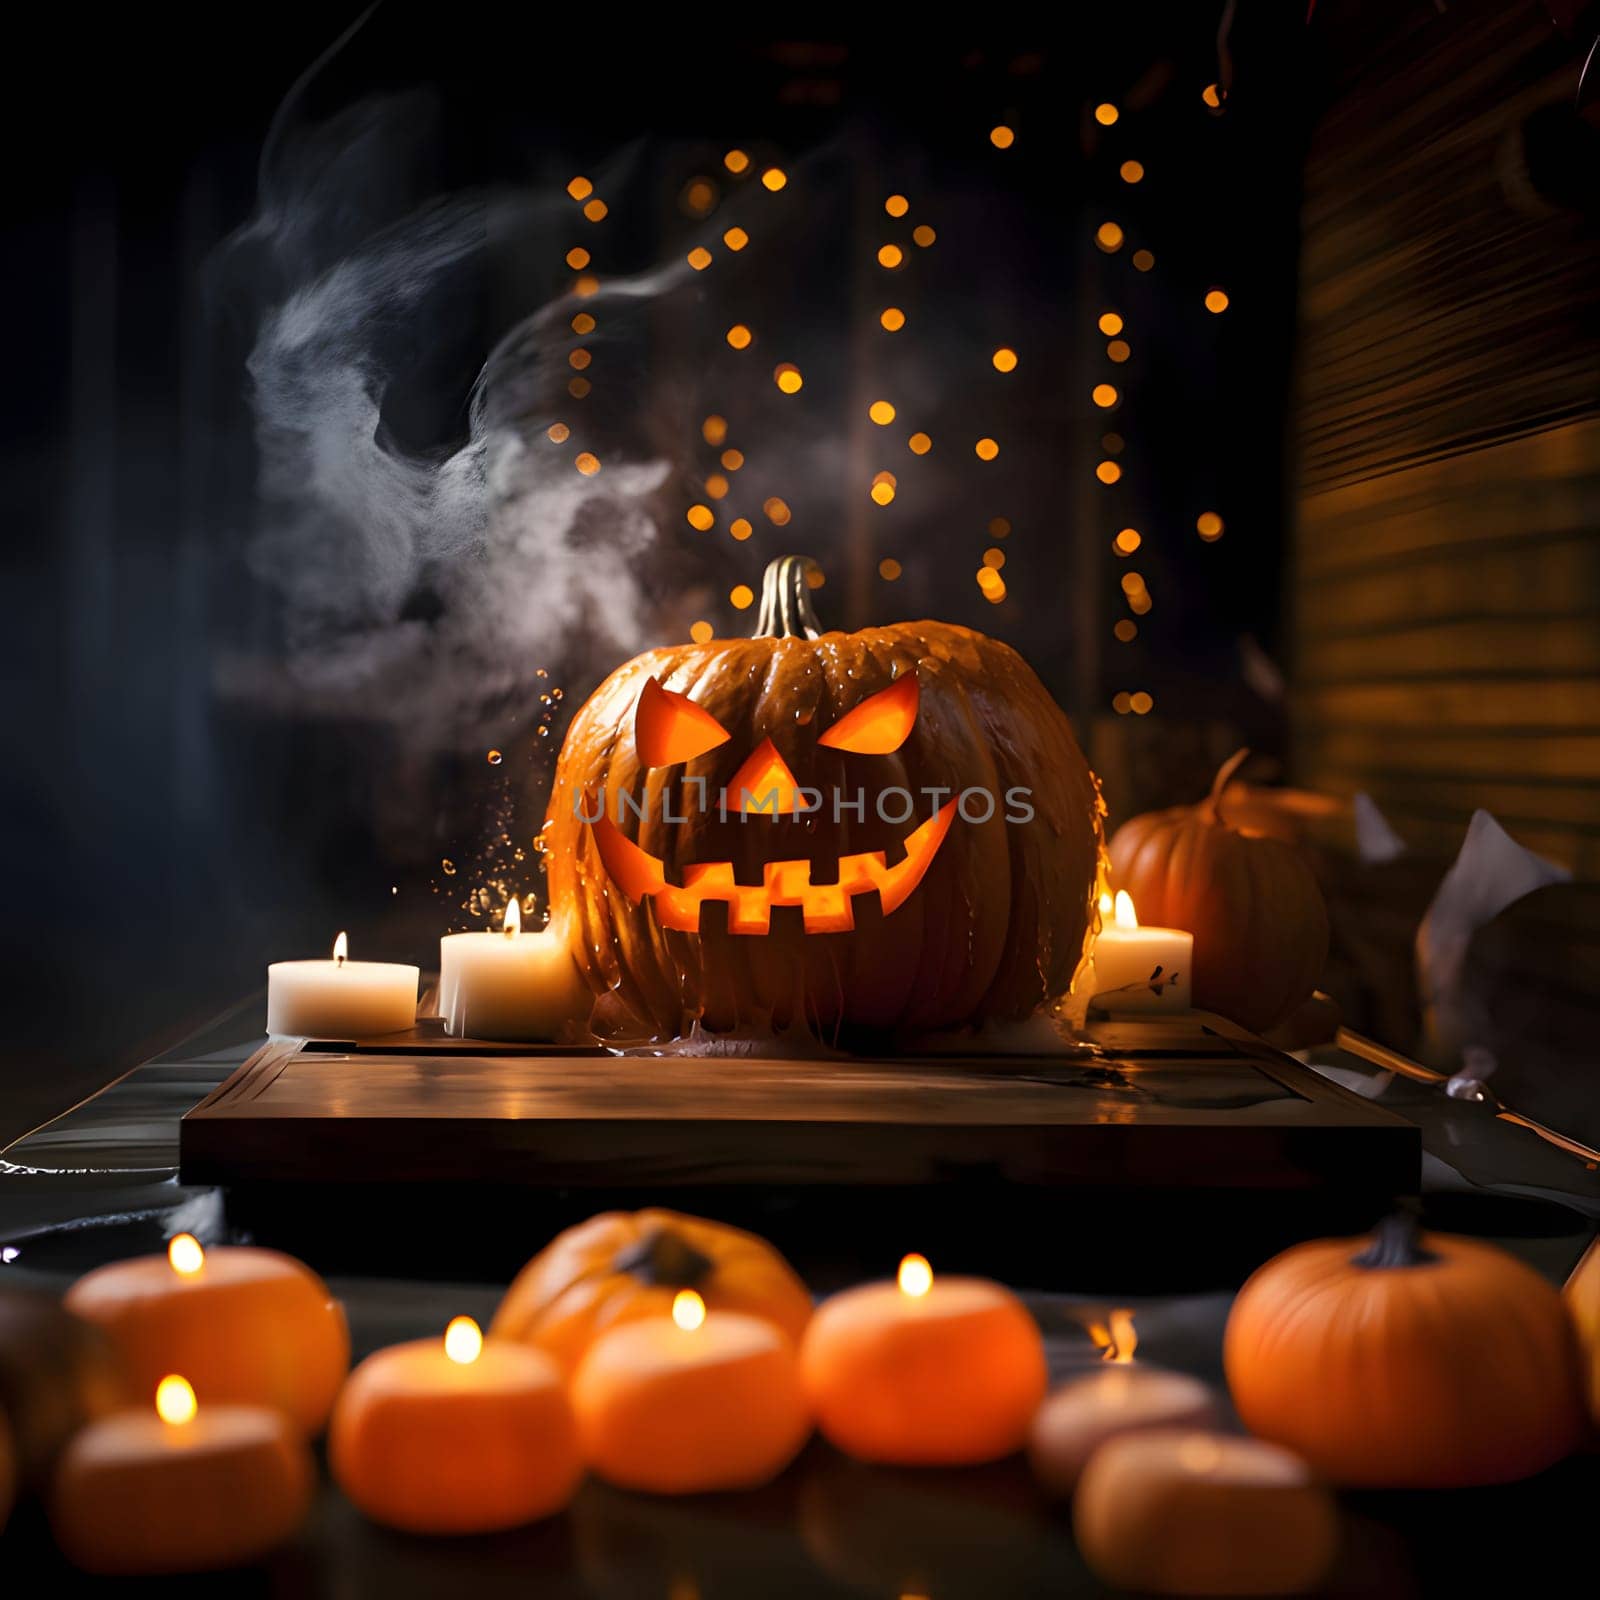 Big glowing jack-o-lantern pumpkin in the background bokeh effect, candles burning in the foreground, a Halloween image. Atmosphere of darkness and fear.